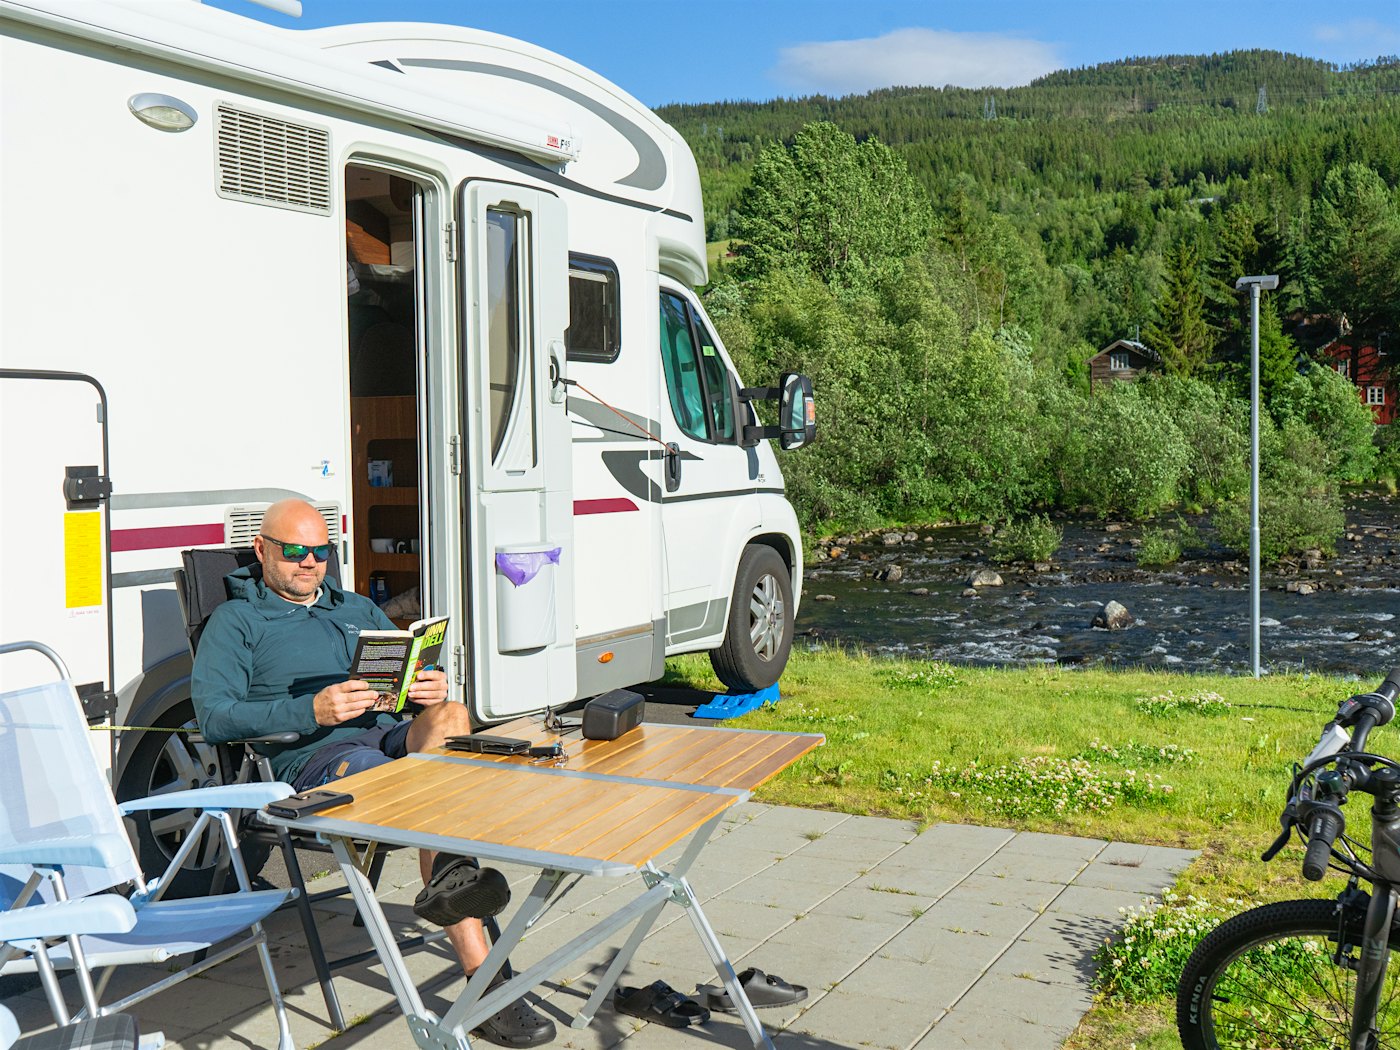 Man sits outside motorhome reading a book. River in the background. Photo